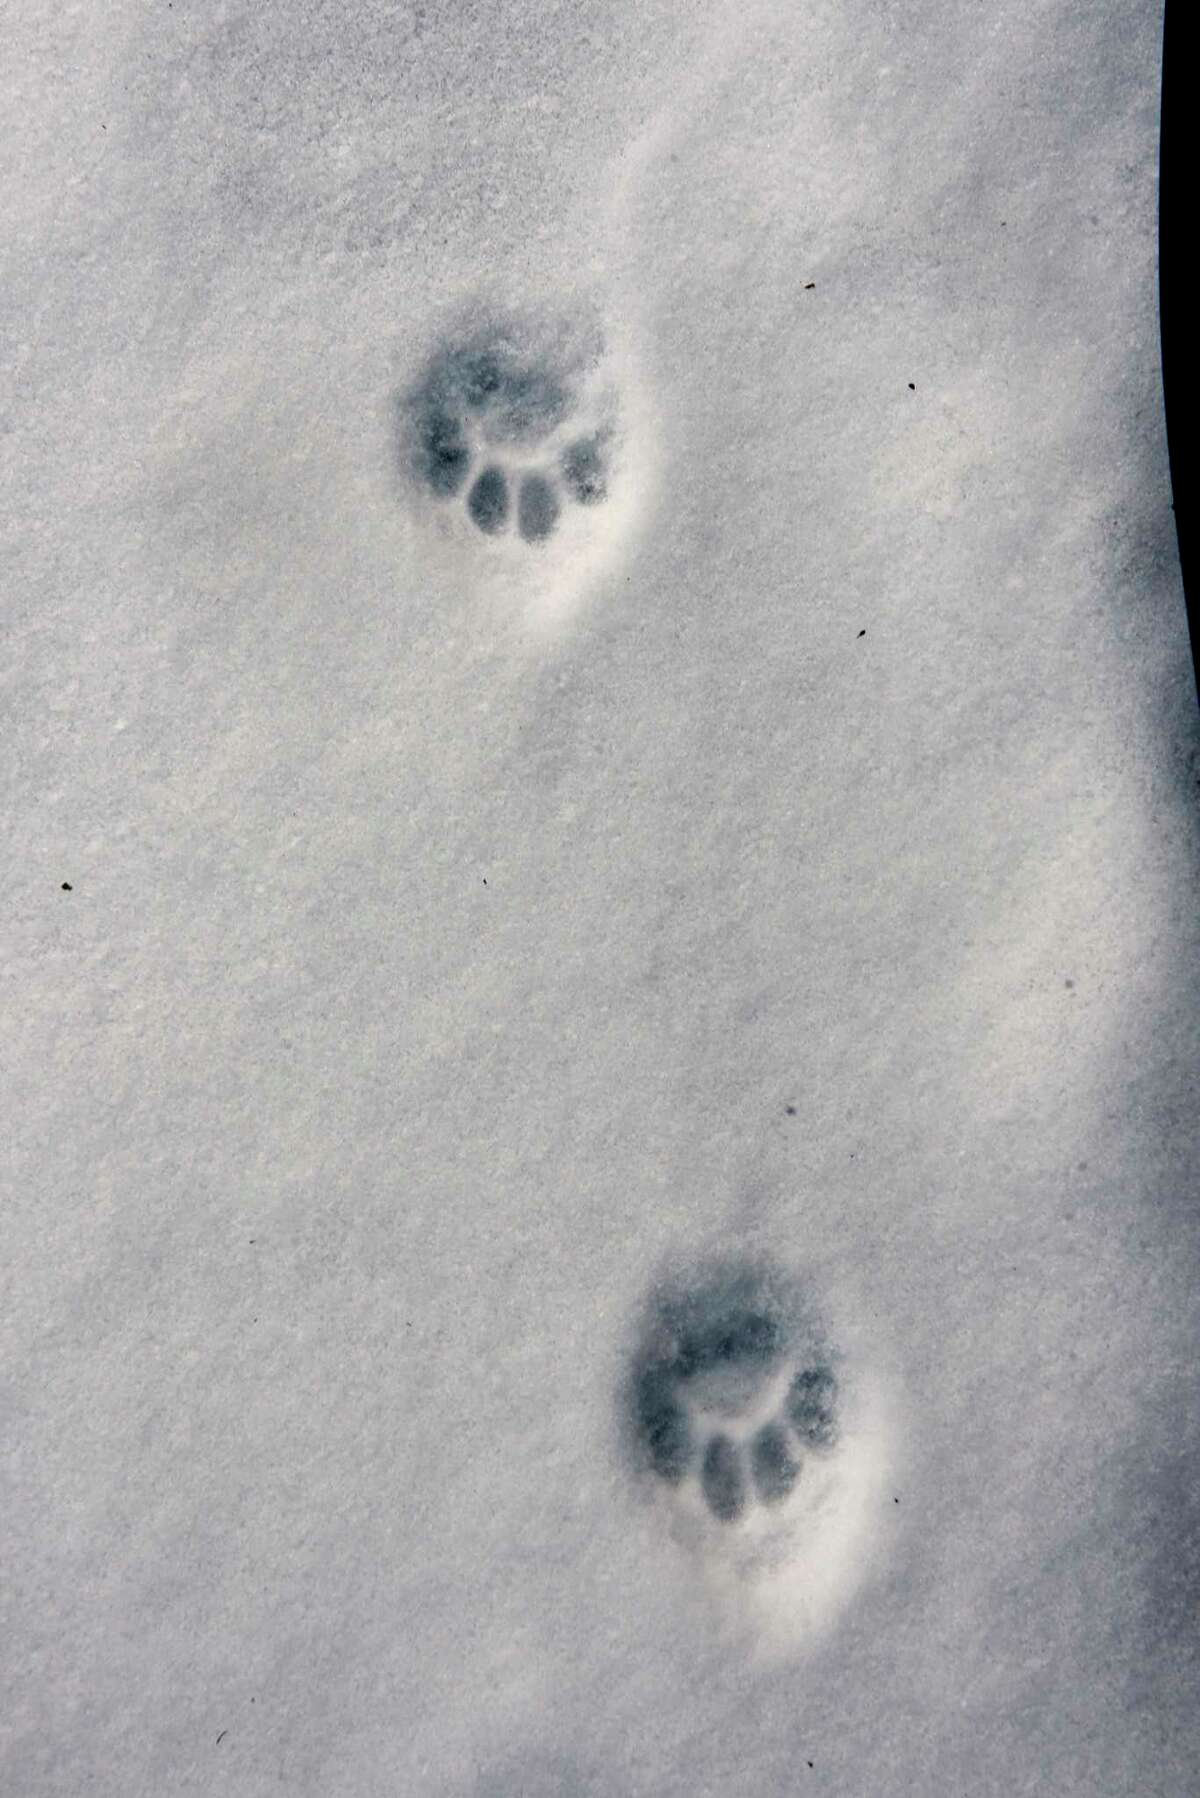 Cat prints are seen in the snow on Monday, Feb. 8, 2021 in Albany, N.Y. (Lori Van Buren/Times Union)